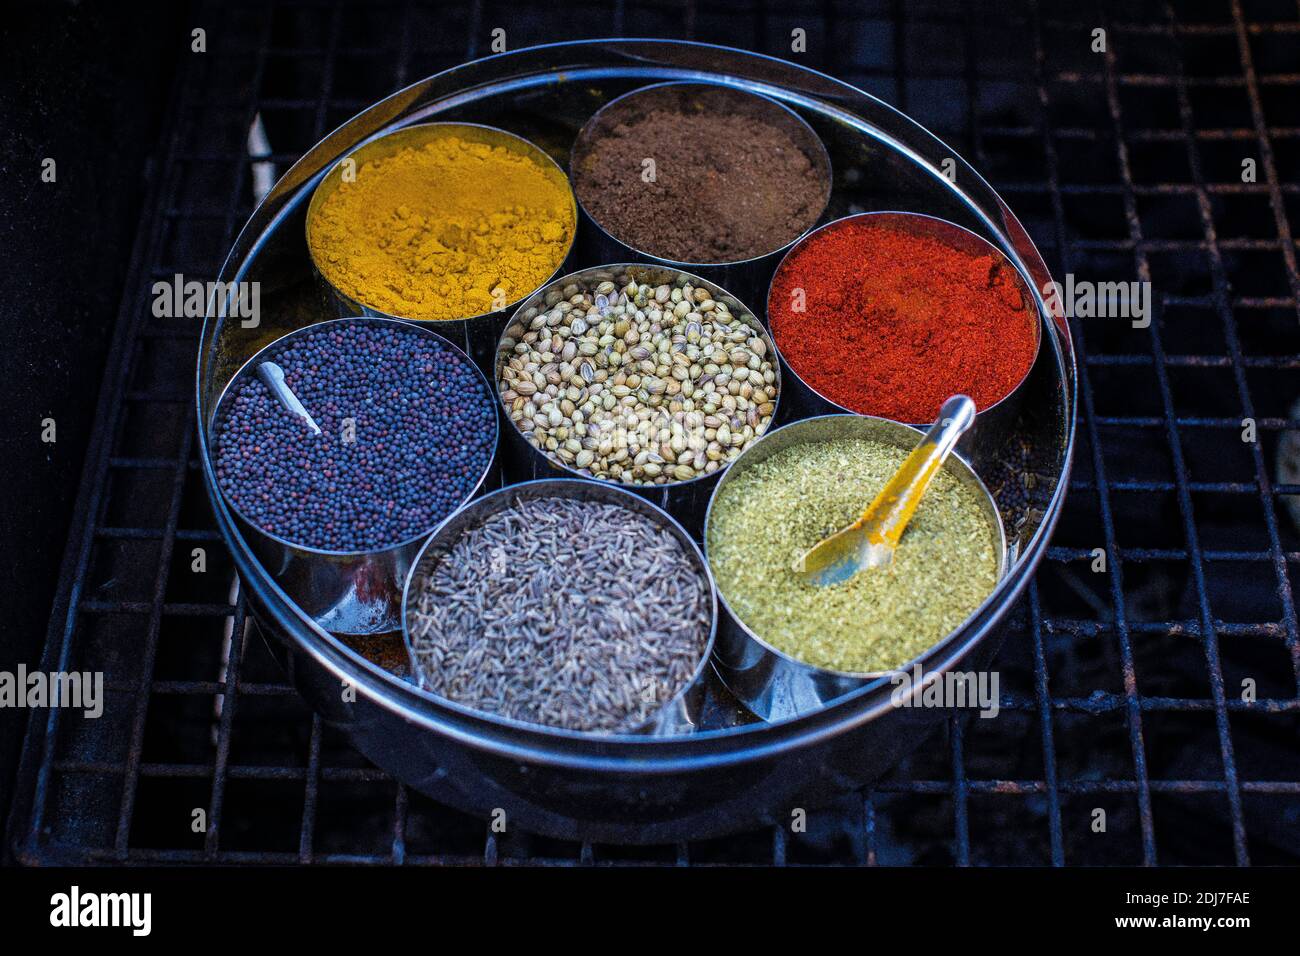 GREAT BRITAIN / England / Hertfordshire / High quality hand-blended and homeground essential Spices for Indian Cooking . Stock Photo